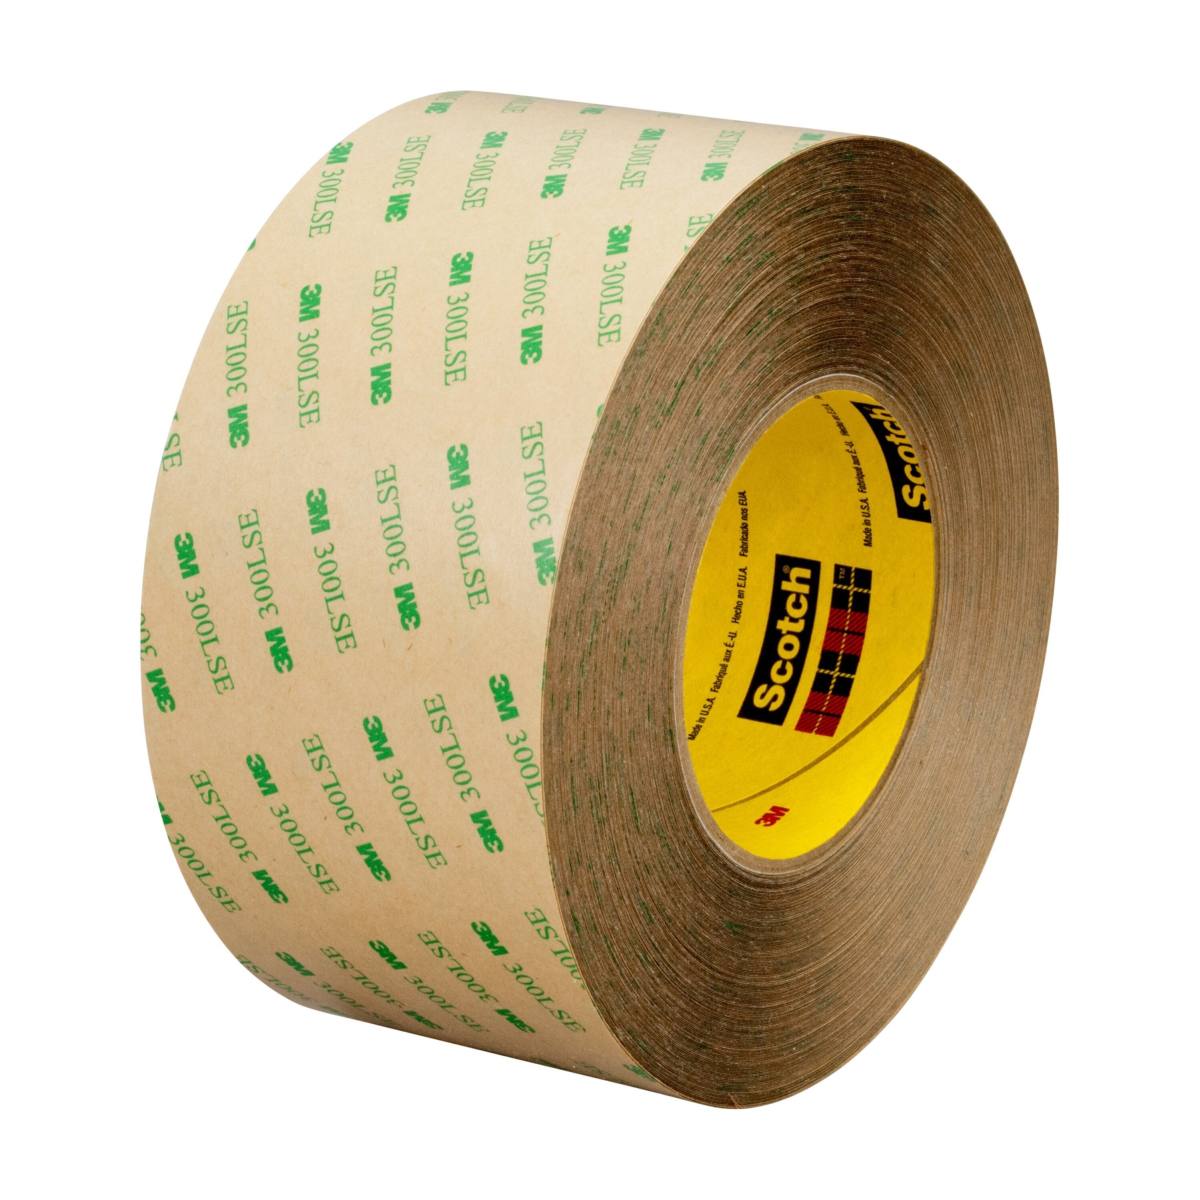 3M Dubbelzijdig plakband met polyester drager 93020LE, transparant, 12 mm x 55 m, 0,20 mm